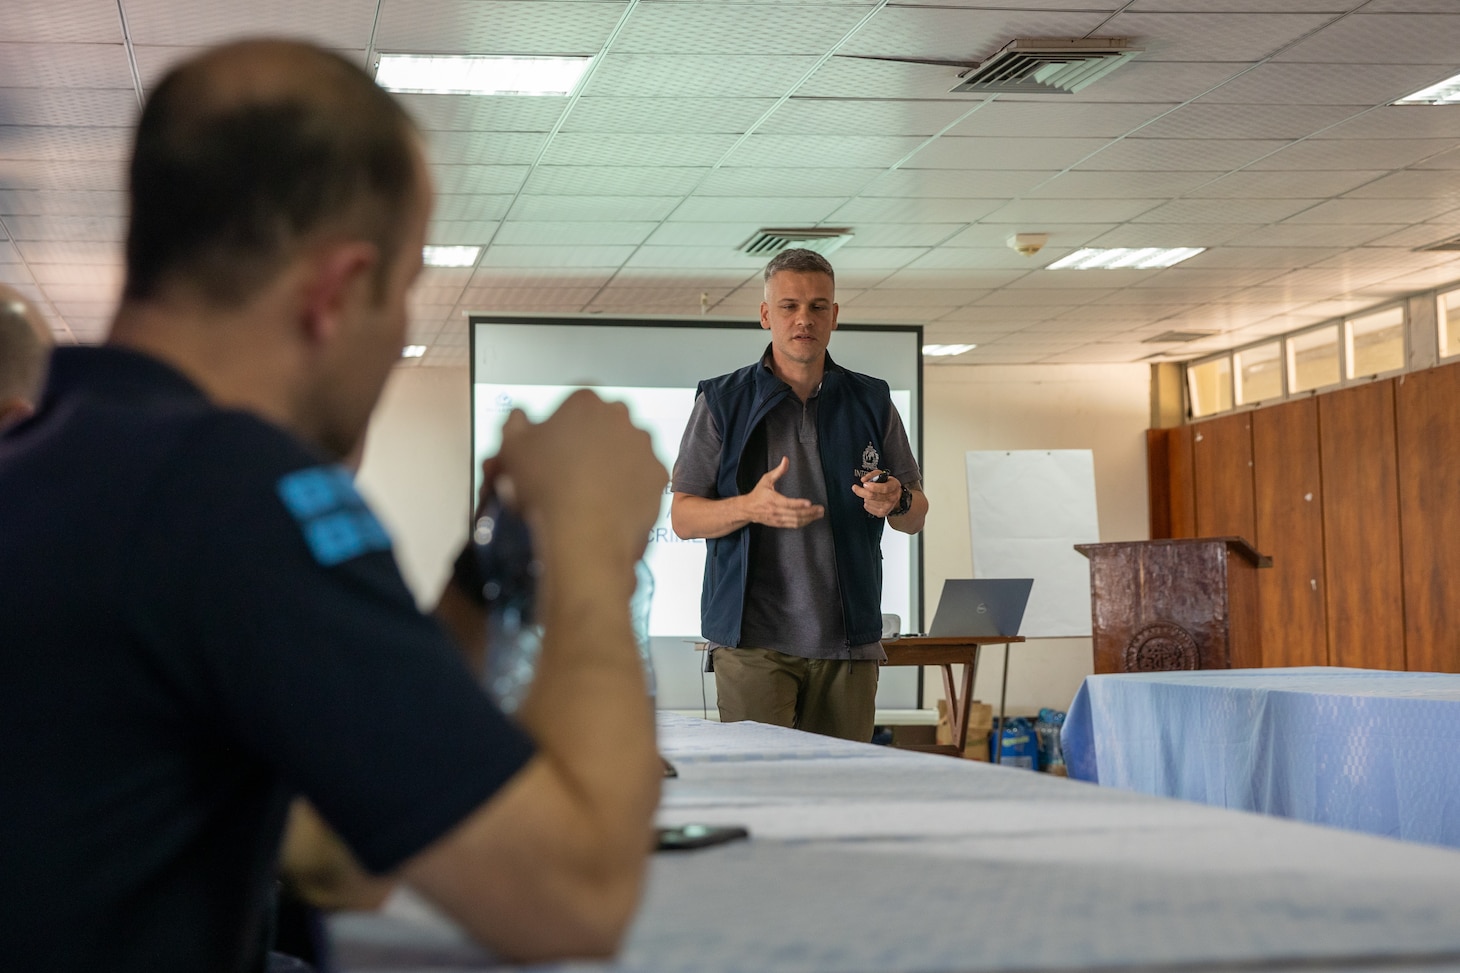 230307-N-FV745-1068 RAVLUNDA, Sweden (June 7, 2022) A International Criminal Police Organization (INTERPOL) agent discusses training items with members of the Georgian Coastguard Service members and members of the Mauritius Police Force (MPF) during exercise Cutlass Express 23, March 7, 2022. Cutlass Express 2023, conducted by U.S. Naval Forces Africa (NAVAF) and sponsored by U.S. Africa Command (AFRICOM) is designed to assess and improve combined maritime law enforcement techniques, promote safety and security in the Western Indian Ocean, and increase interoperability between participating nations. U.S. Sixth Fleet, headquartered in Naples, Italy, conducts the full spectrum of joint and naval operations, often in concert with allied and interagency partners, in order to advance U.S. national interests and security and stability in Europe and Africa. (U.S. Navy photo by Mass Communication Specialist 1st Class Daniel James Lanari/Released)